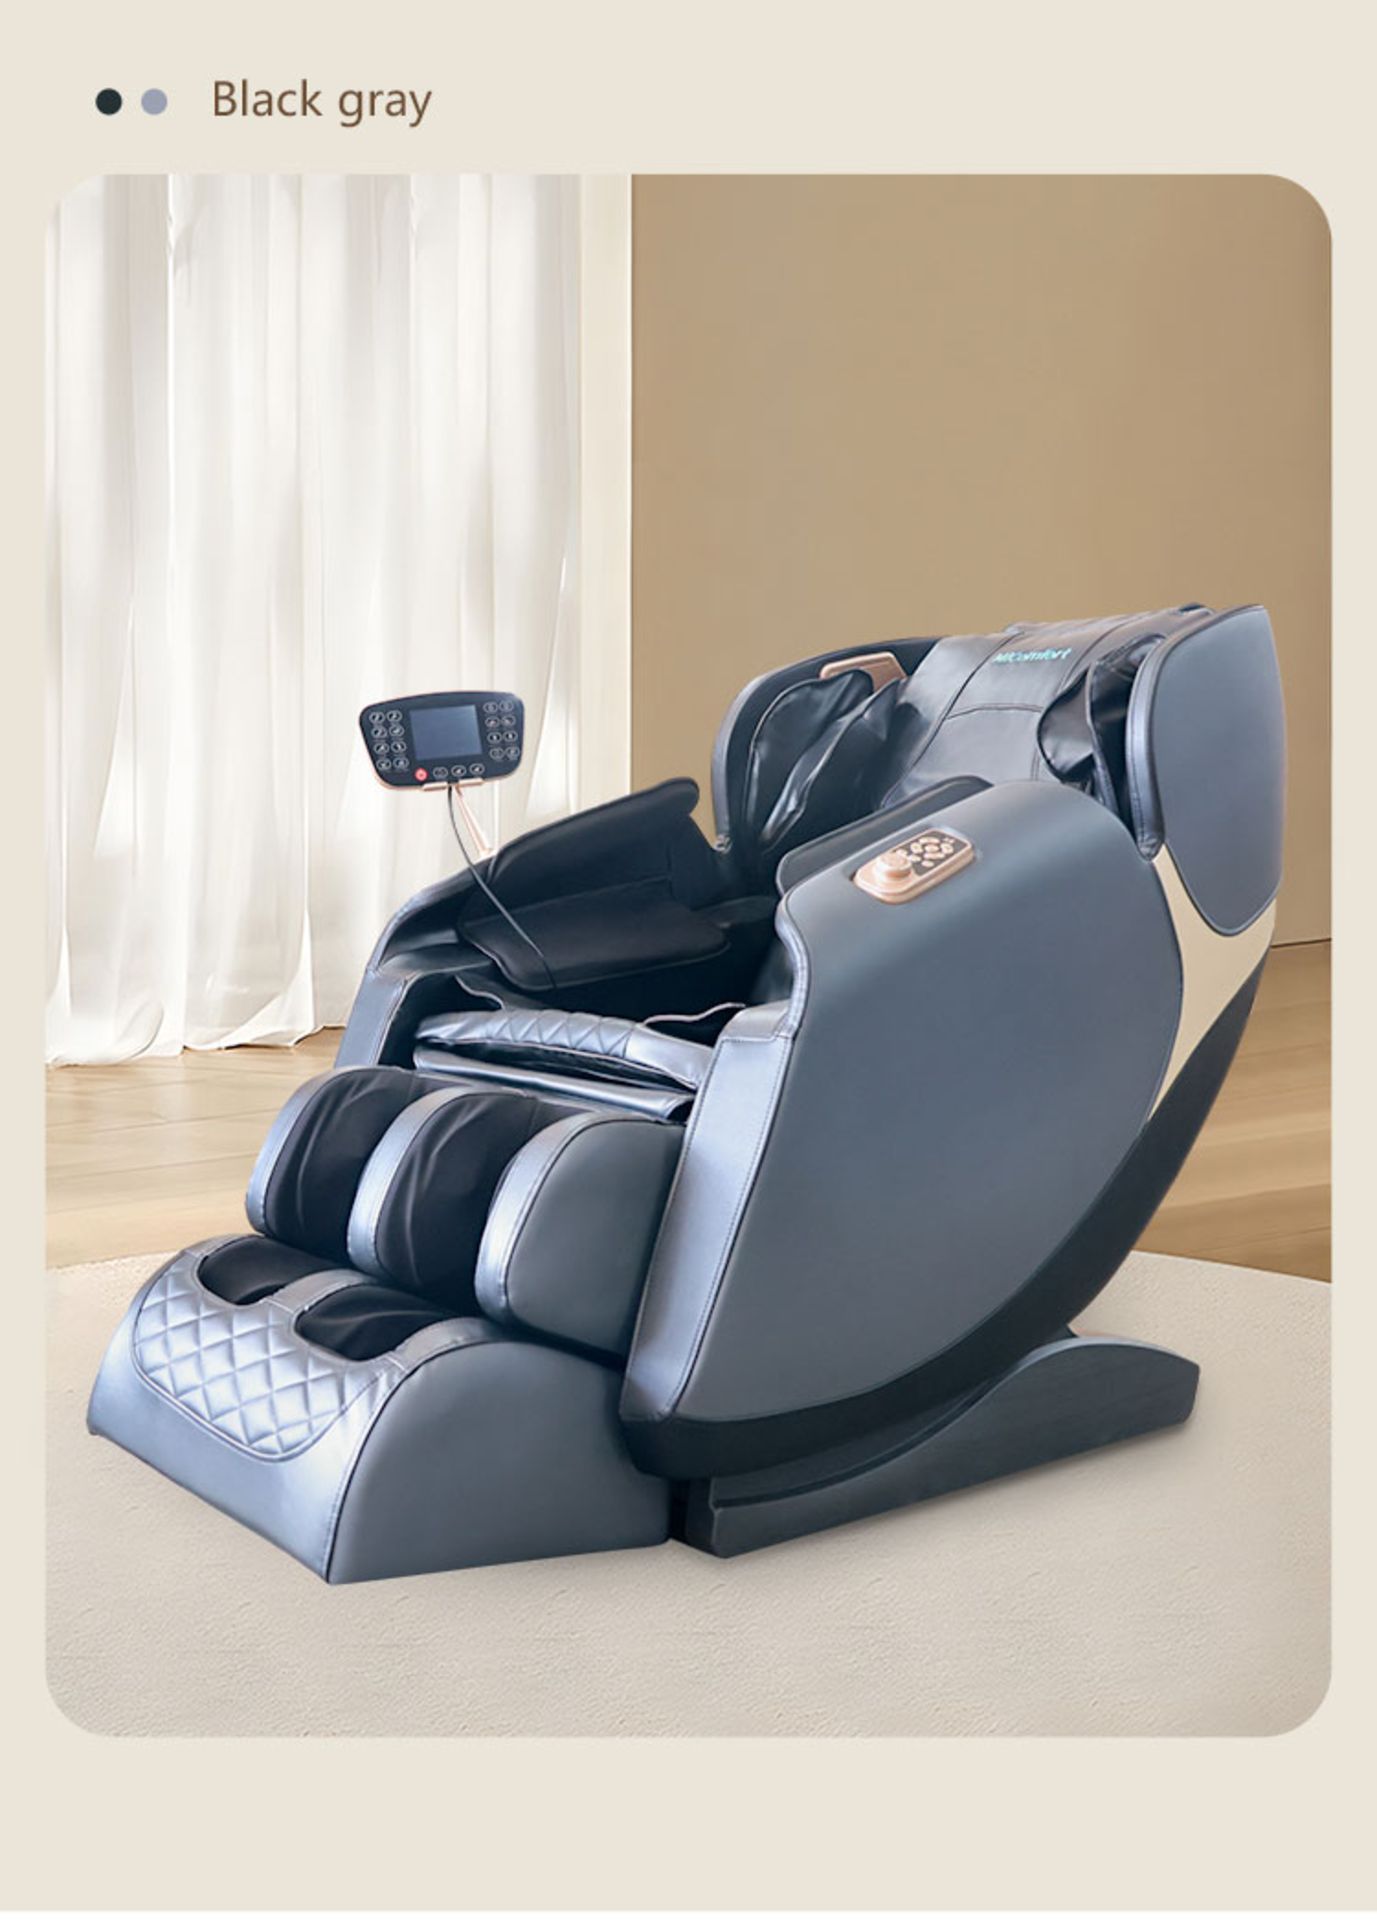 Brand New in Box Orchid Blue/Black MiComfort Full Body Massage Chair RRP £2199 *NO VAT* - Image 5 of 14